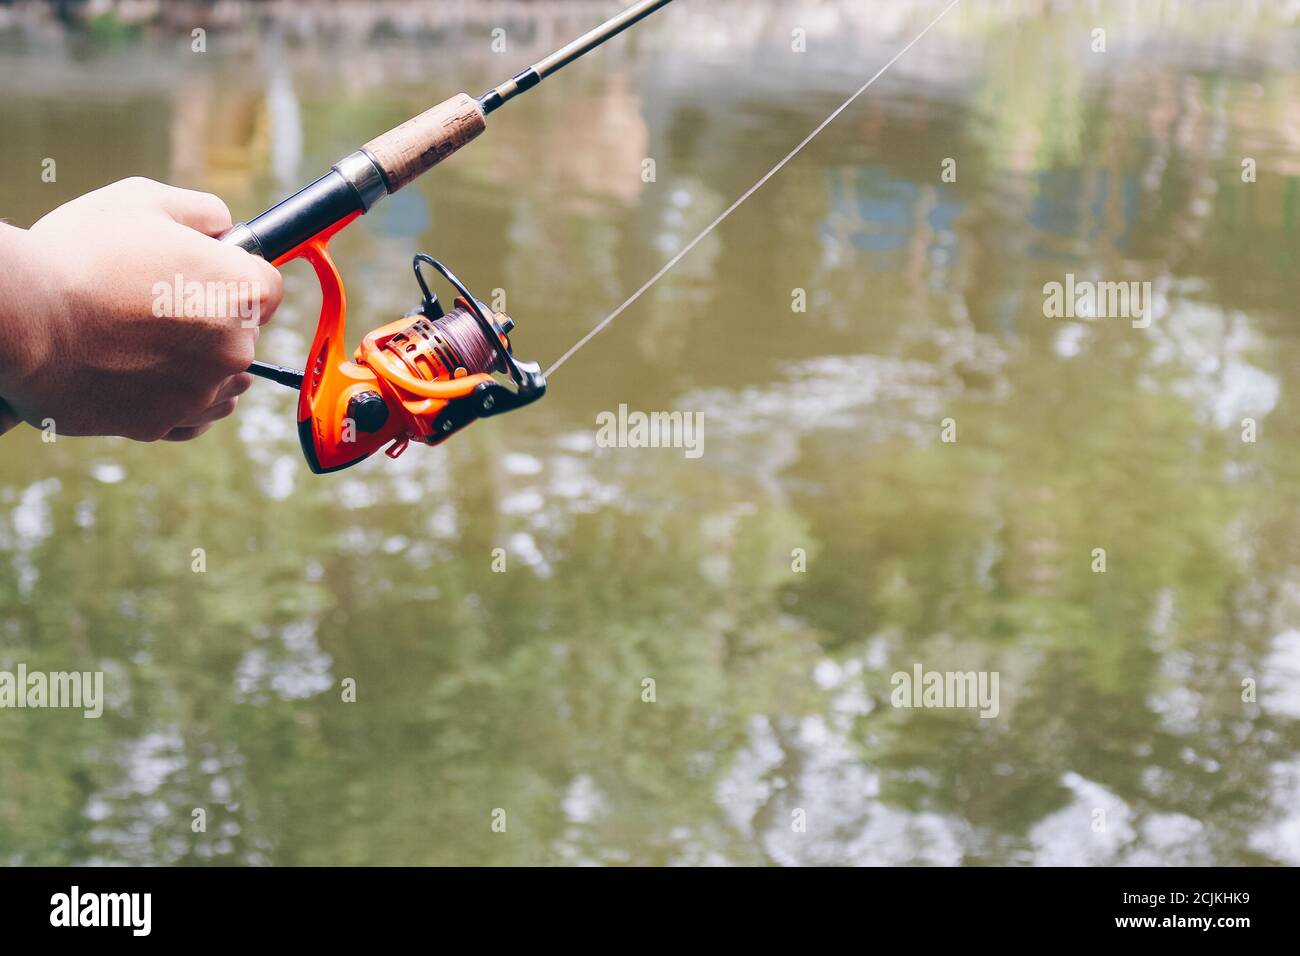 https://c8.alamy.com/comp/2CJKHK9/close-up-of-spinning-with-the-fishing-reel-in-the-hand-fishing-hook-on-the-line-with-the-bait-in-the-left-hand-against-the-background-of-the-water-2CJKHK9.jpg